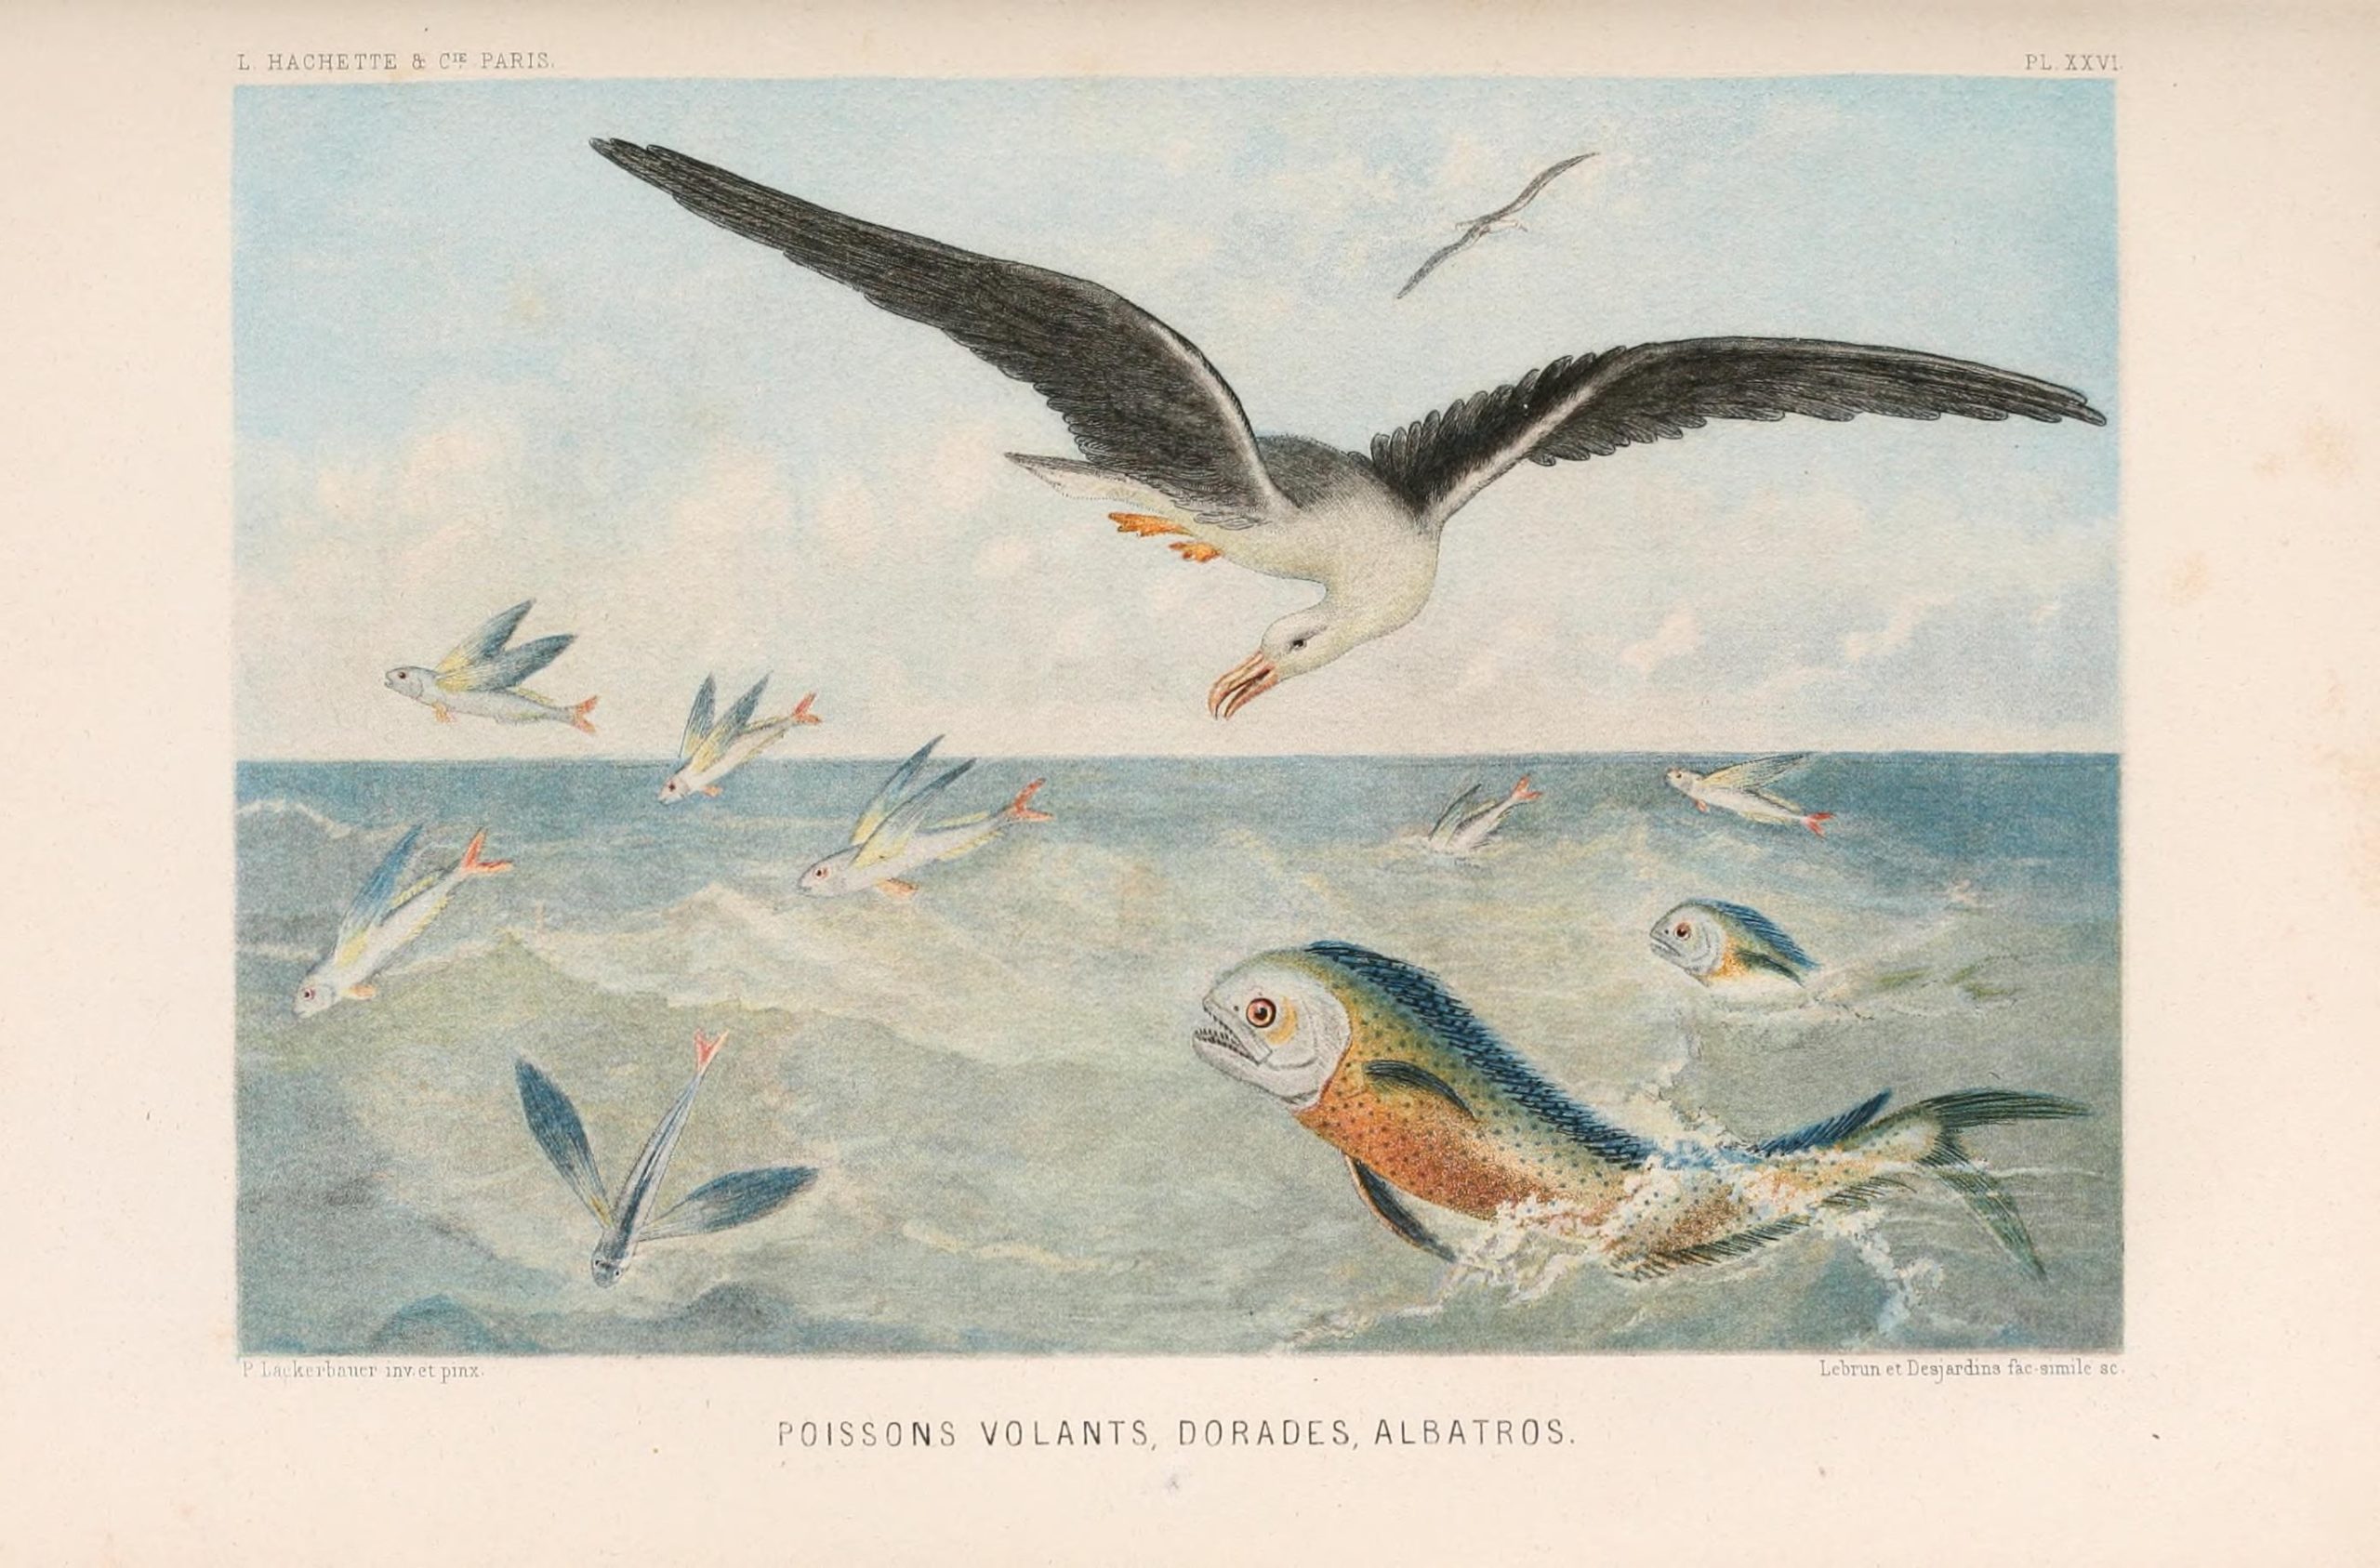 A seagull hunting flying fish in the ocean